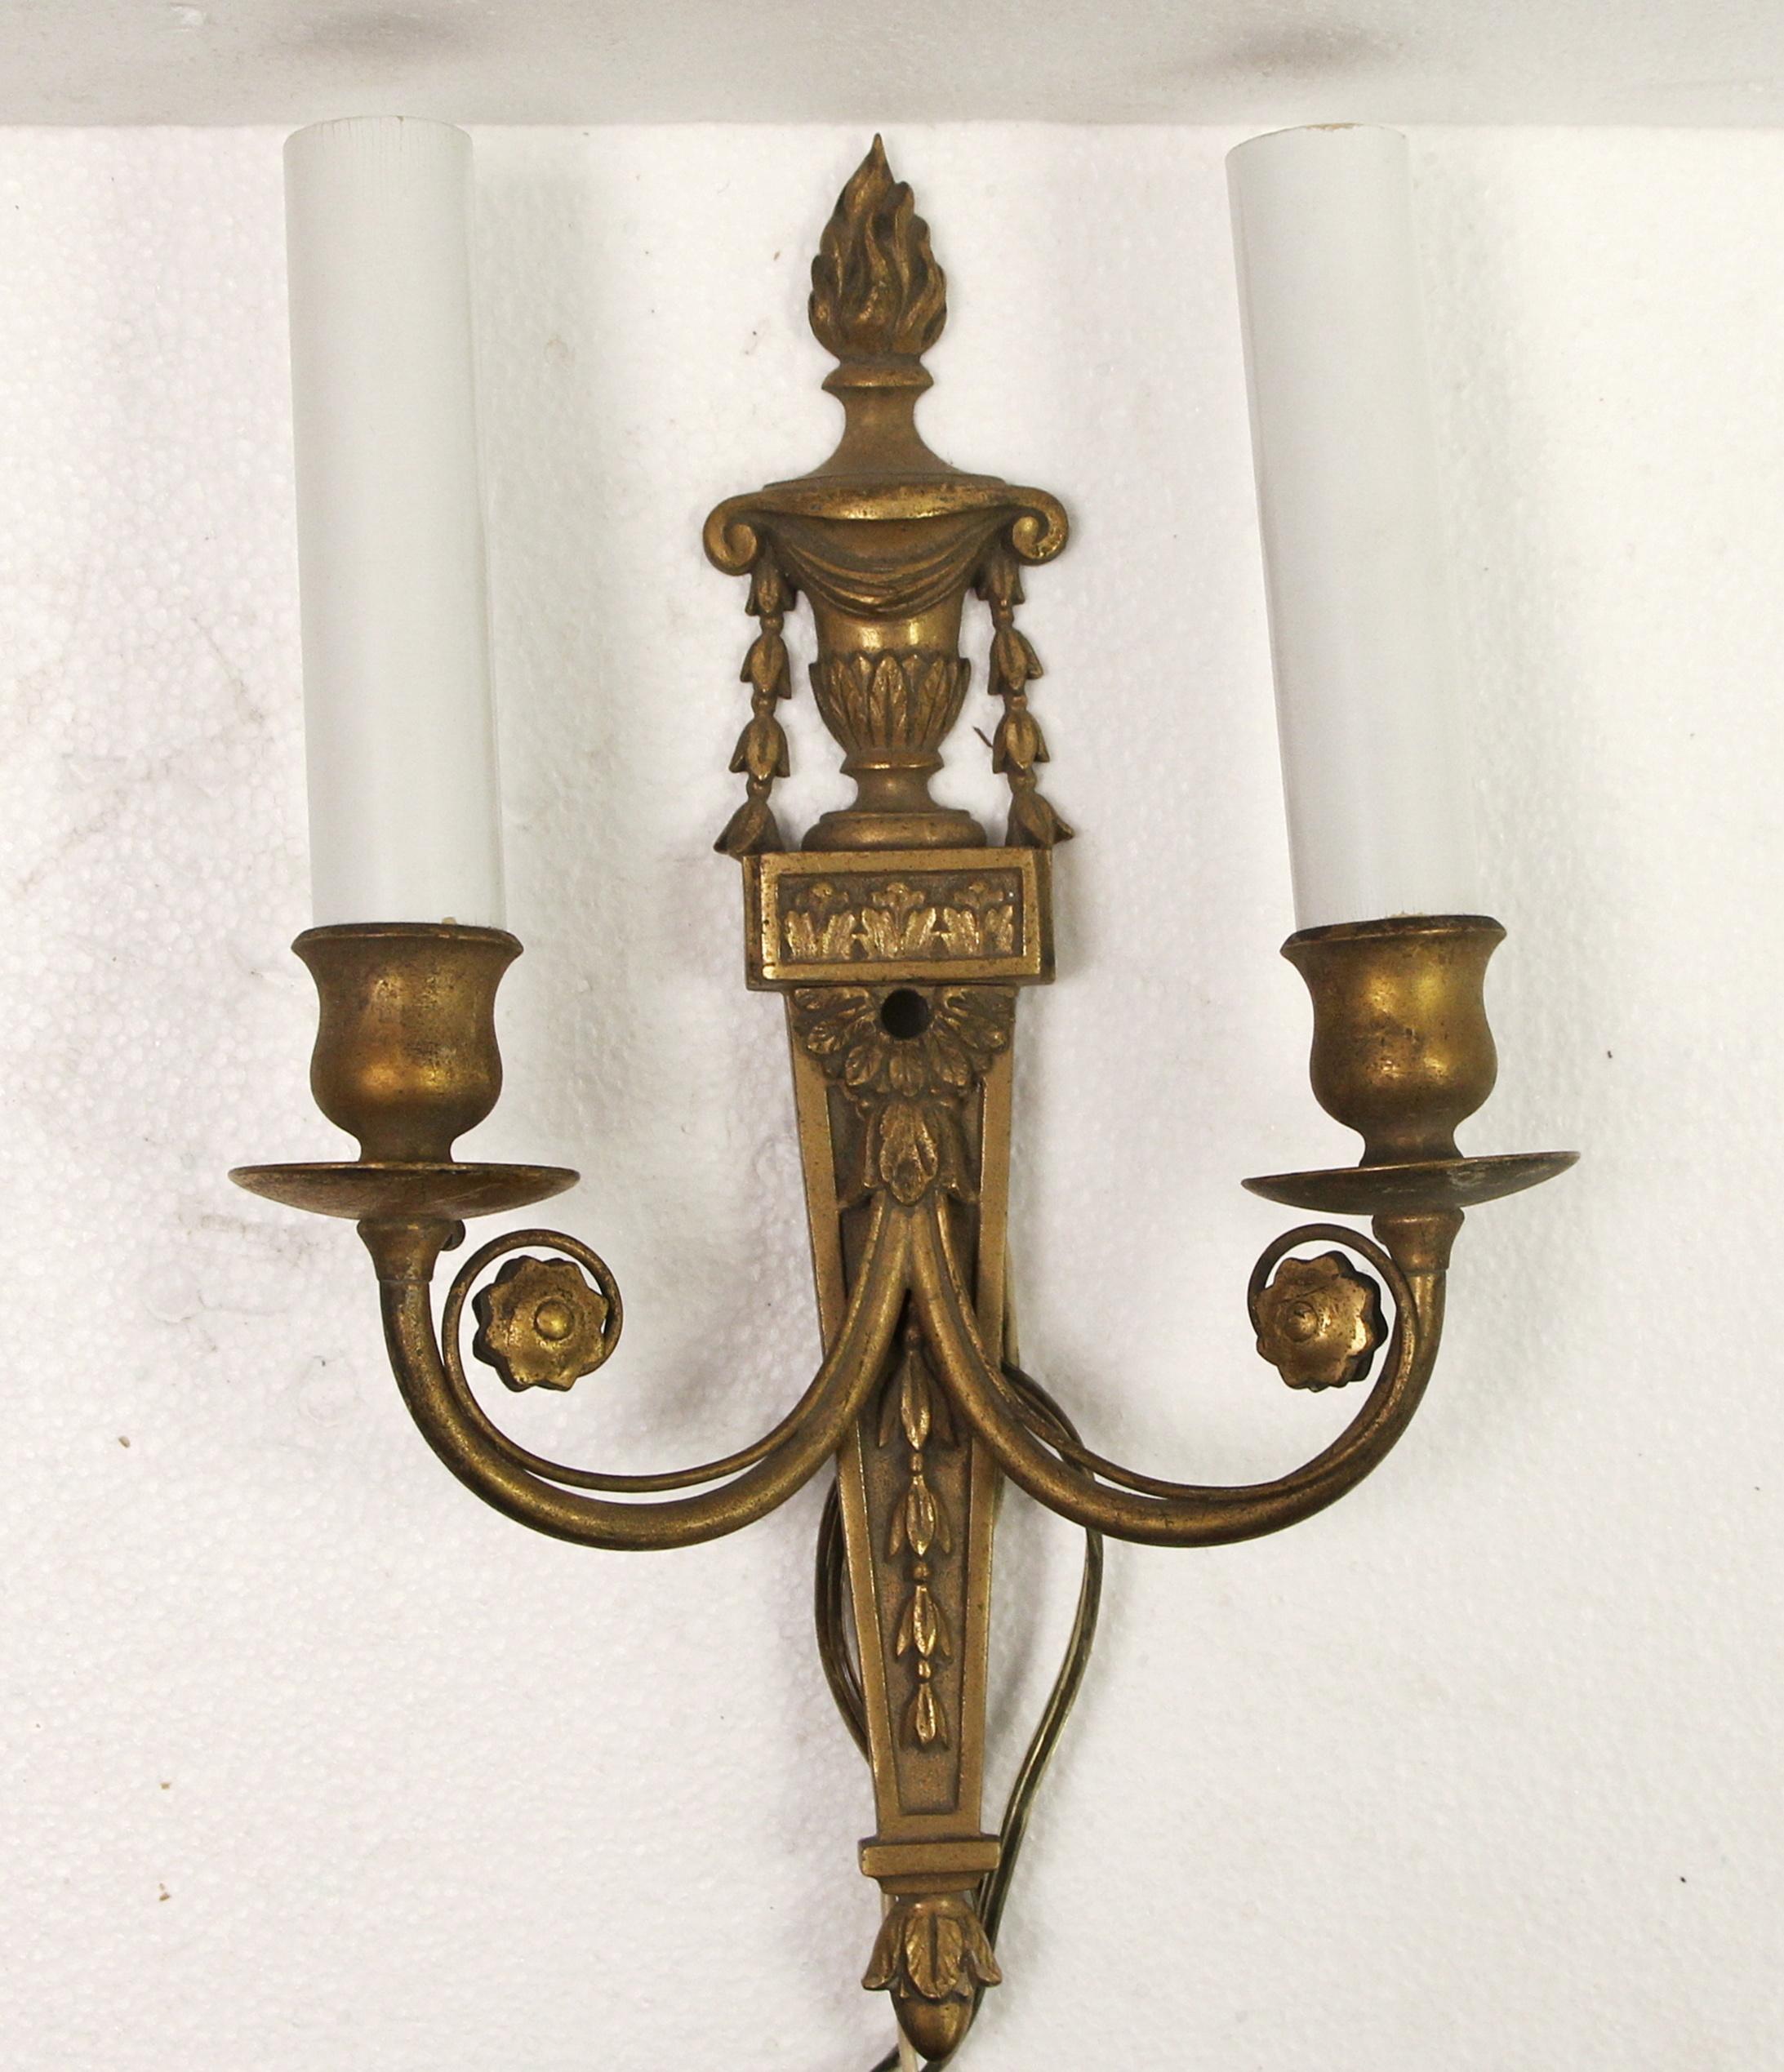 1970s touchier style bronze two candlestick arm sconces with torch detail. This can be seen at our 400 Gilligan St location in Scranton, PA. 